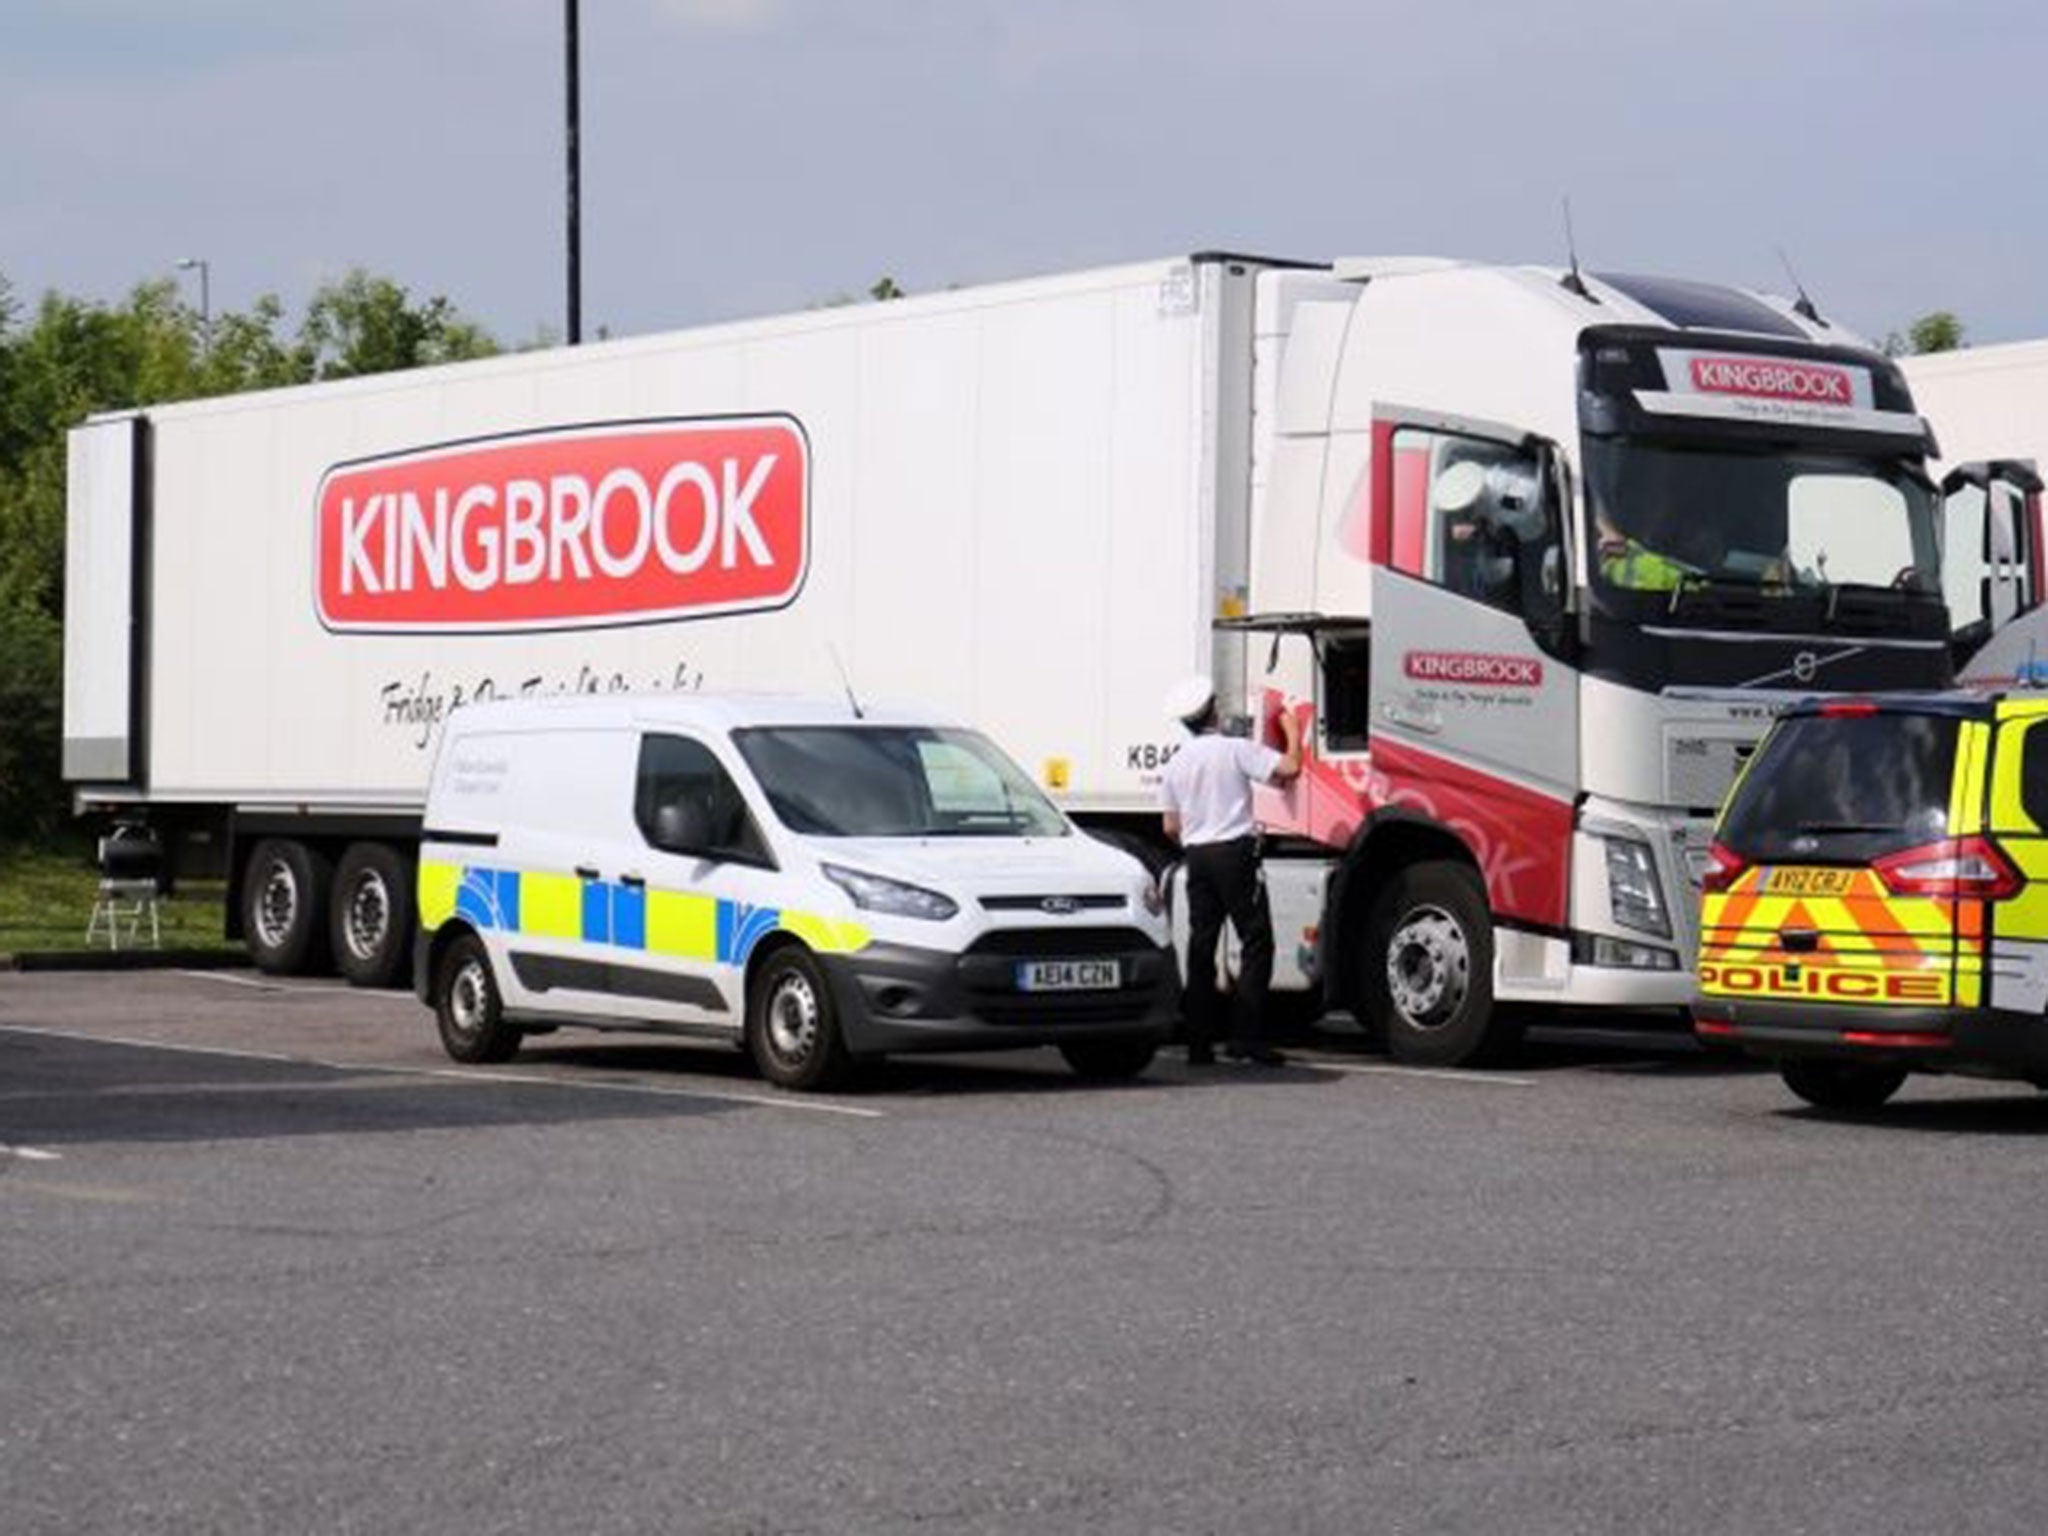 Police search a lorry at Peterborough services in Cambridgeshire after 26 suspected illegal immigrants, including teenagers, were found in the back of the vehicle.